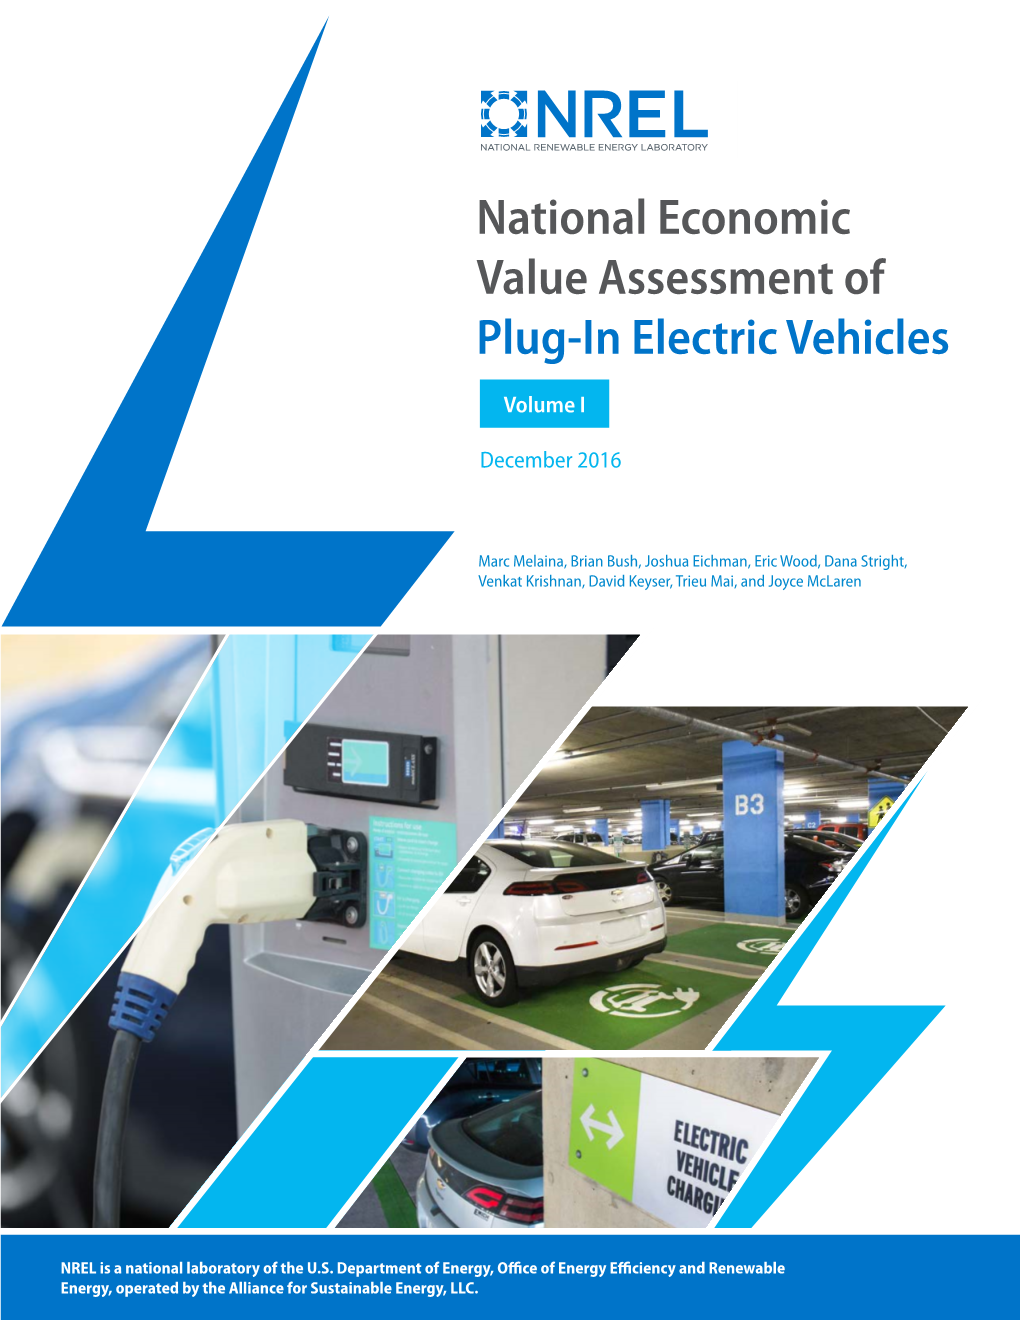 National Economic Value Assessment of Plug-In Electric Vehicles